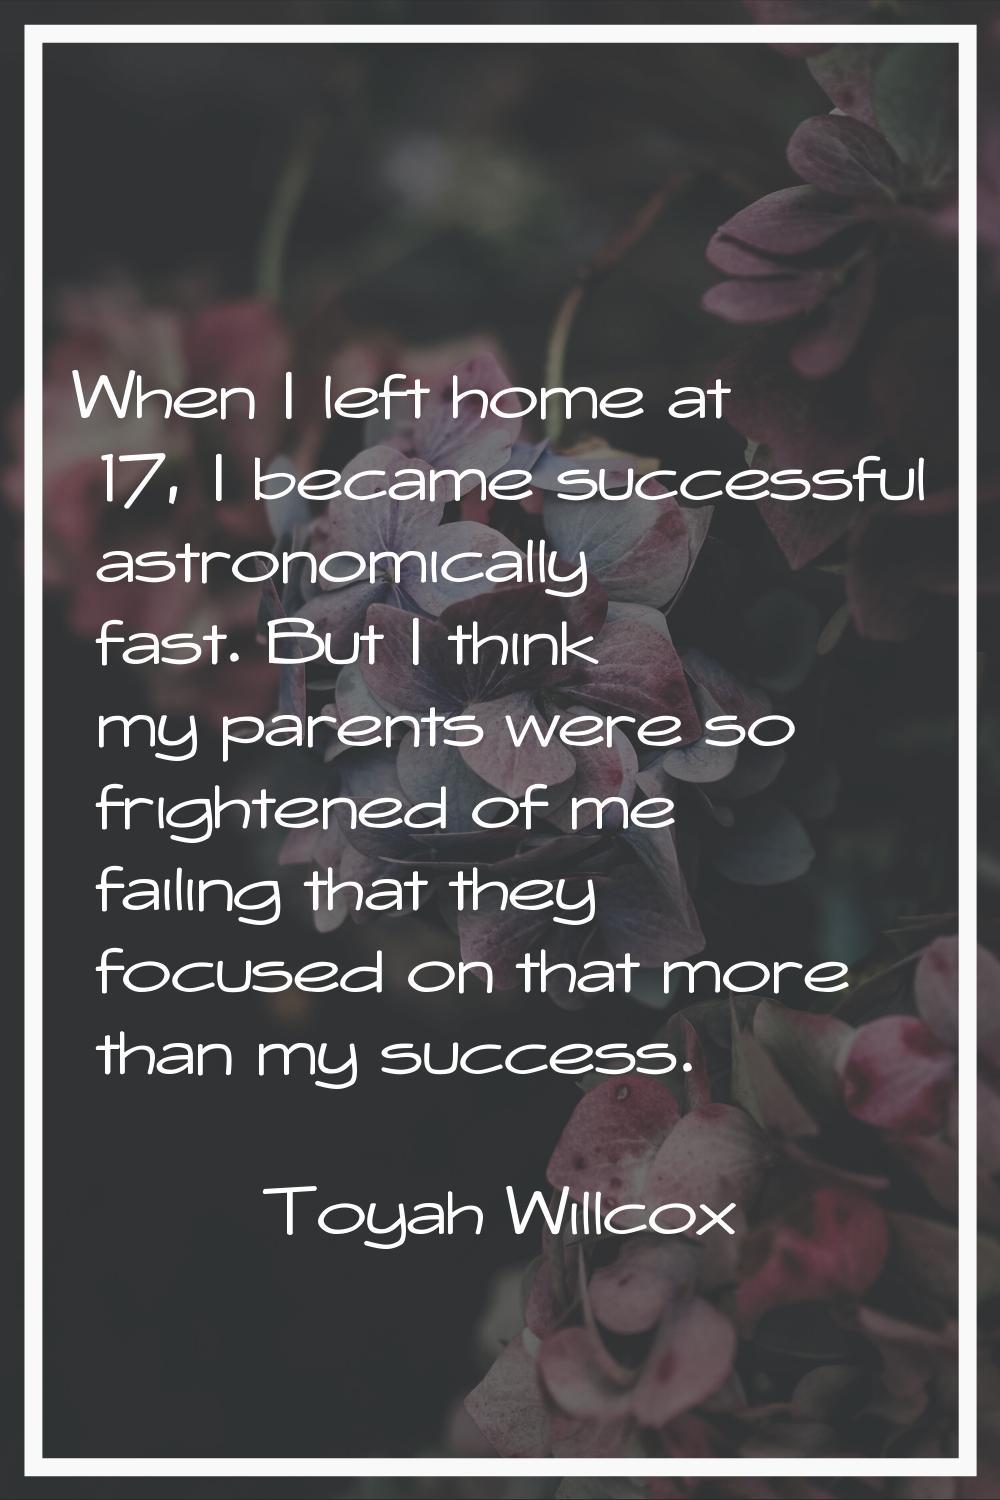 When I left home at 17, I became successful astronomically fast. But I think my parents were so fri